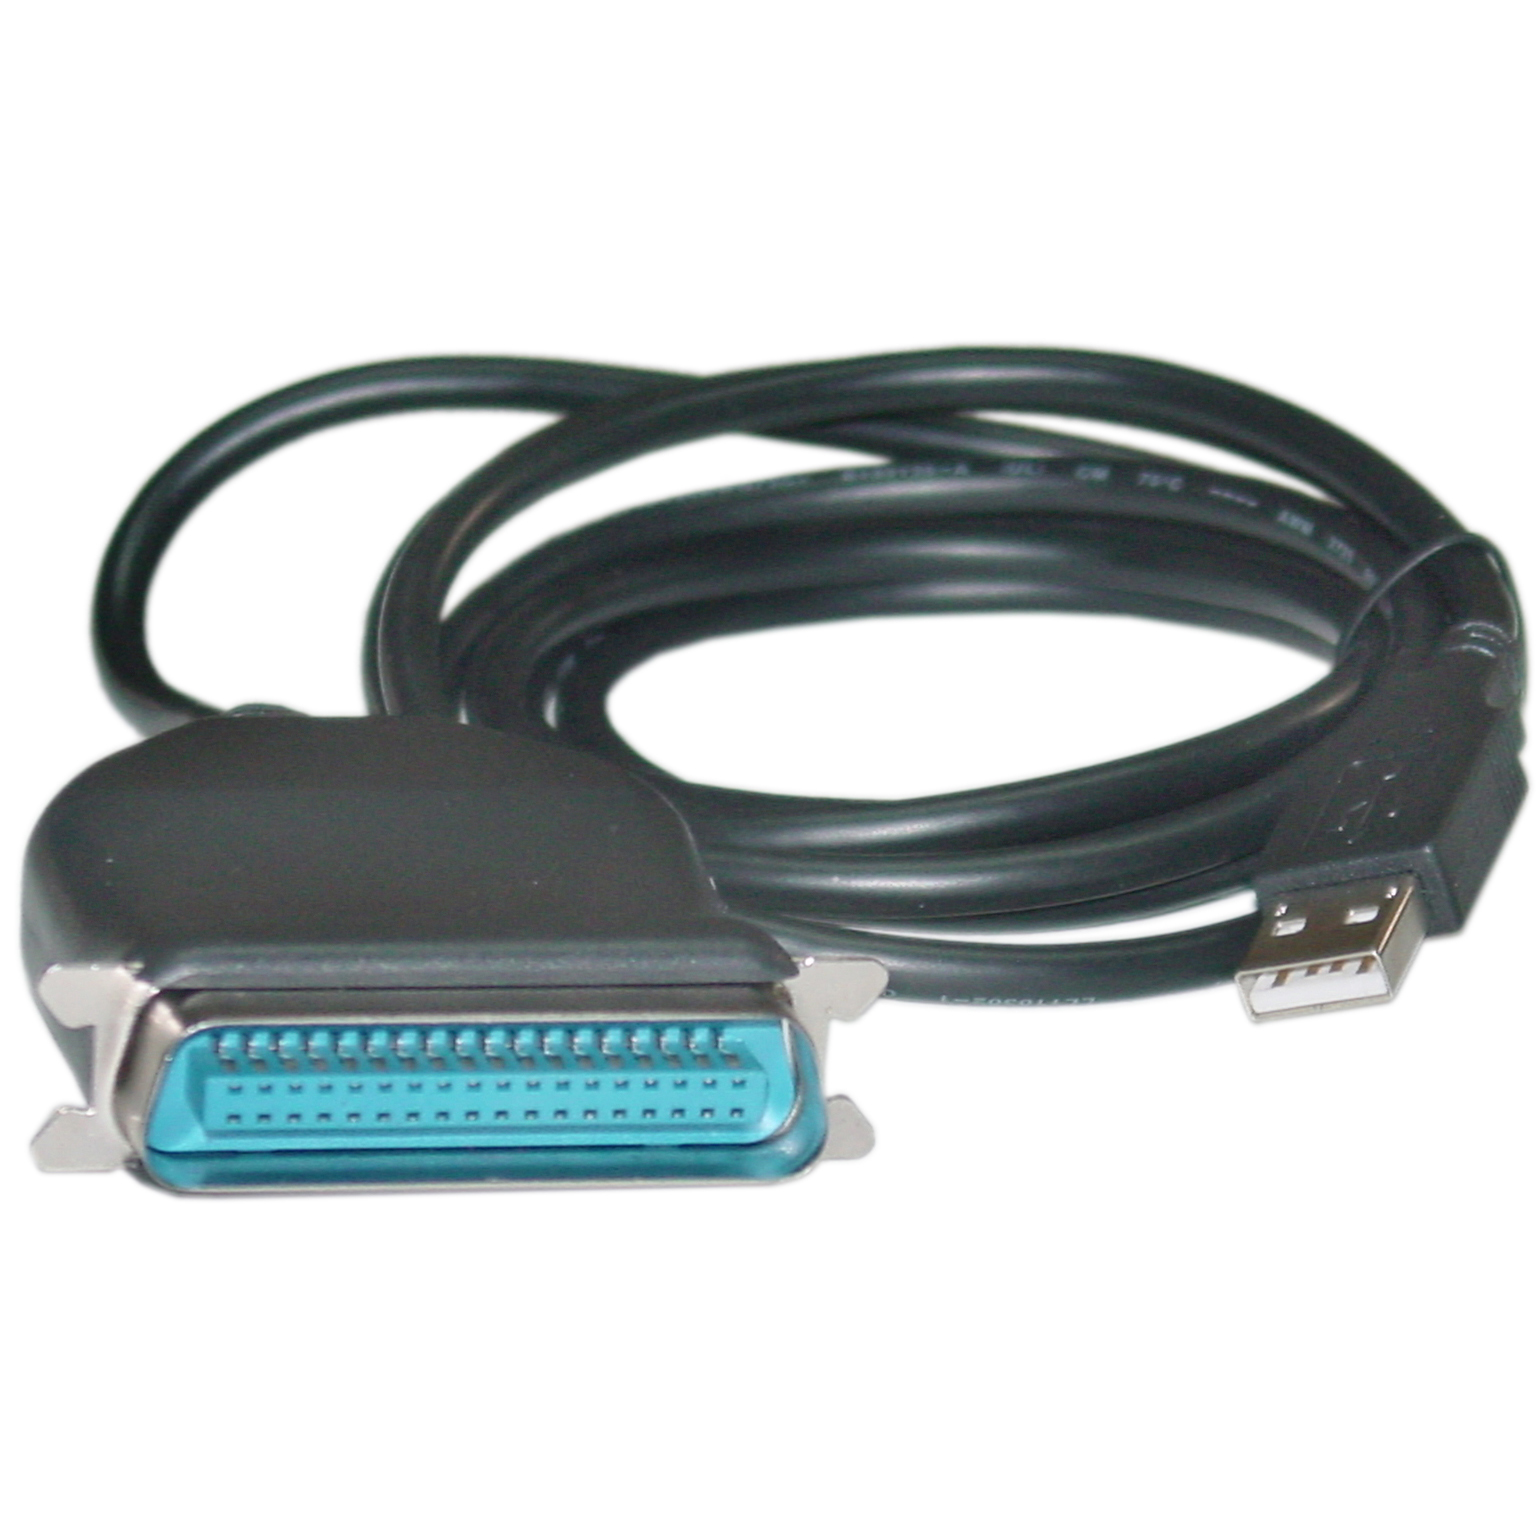 Computer Cables USB to Yoton 1284 Parallel Port Adapter Cable Cable Length: Other 